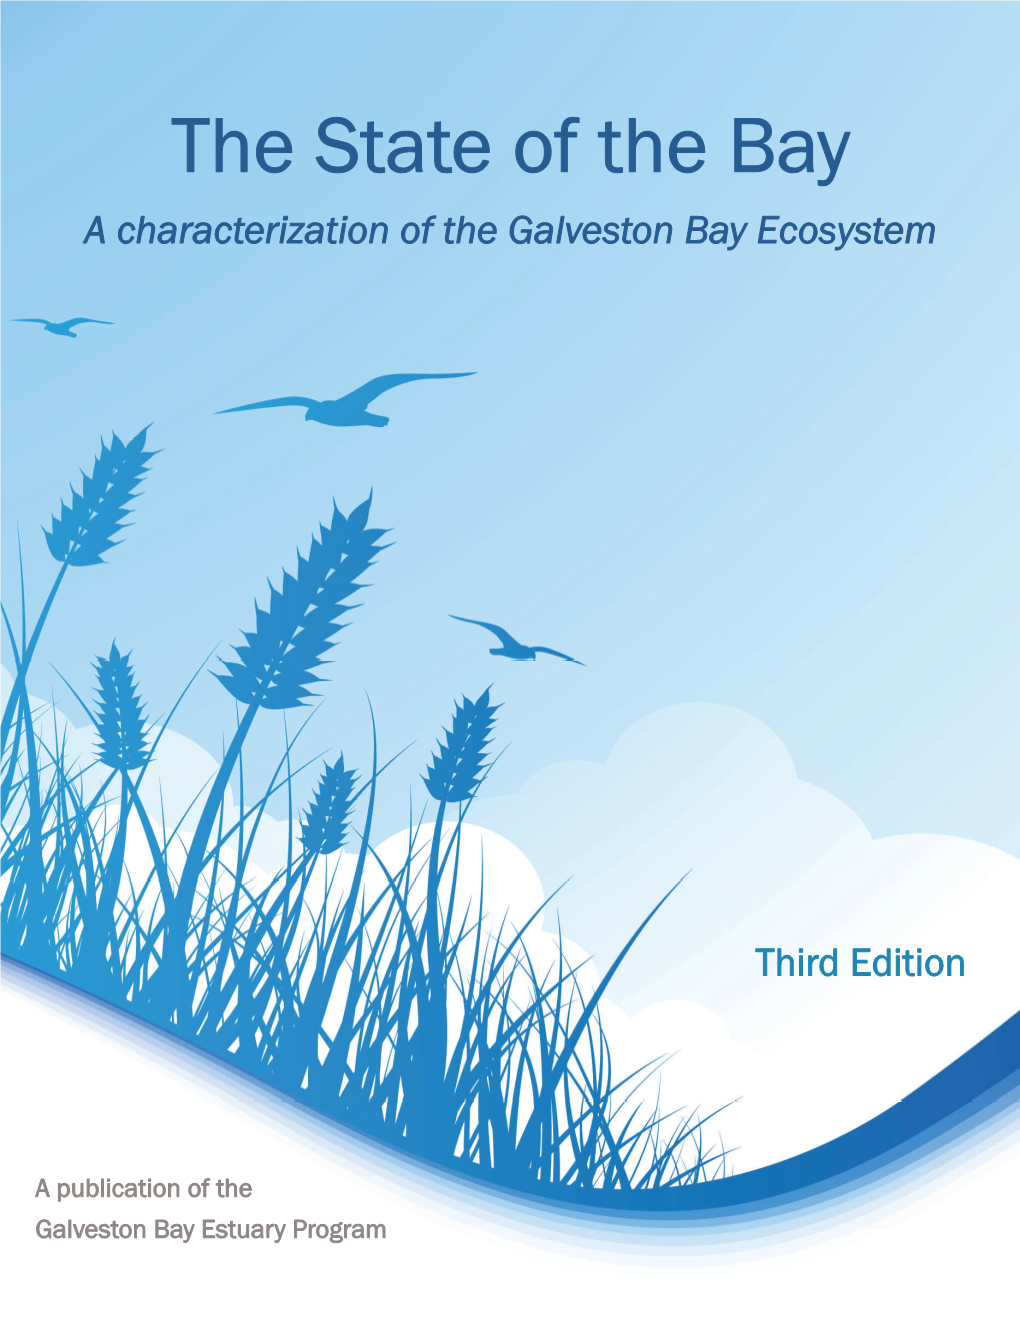 The State of the Bay a Characterization of the Galveston Bay Ecosystem